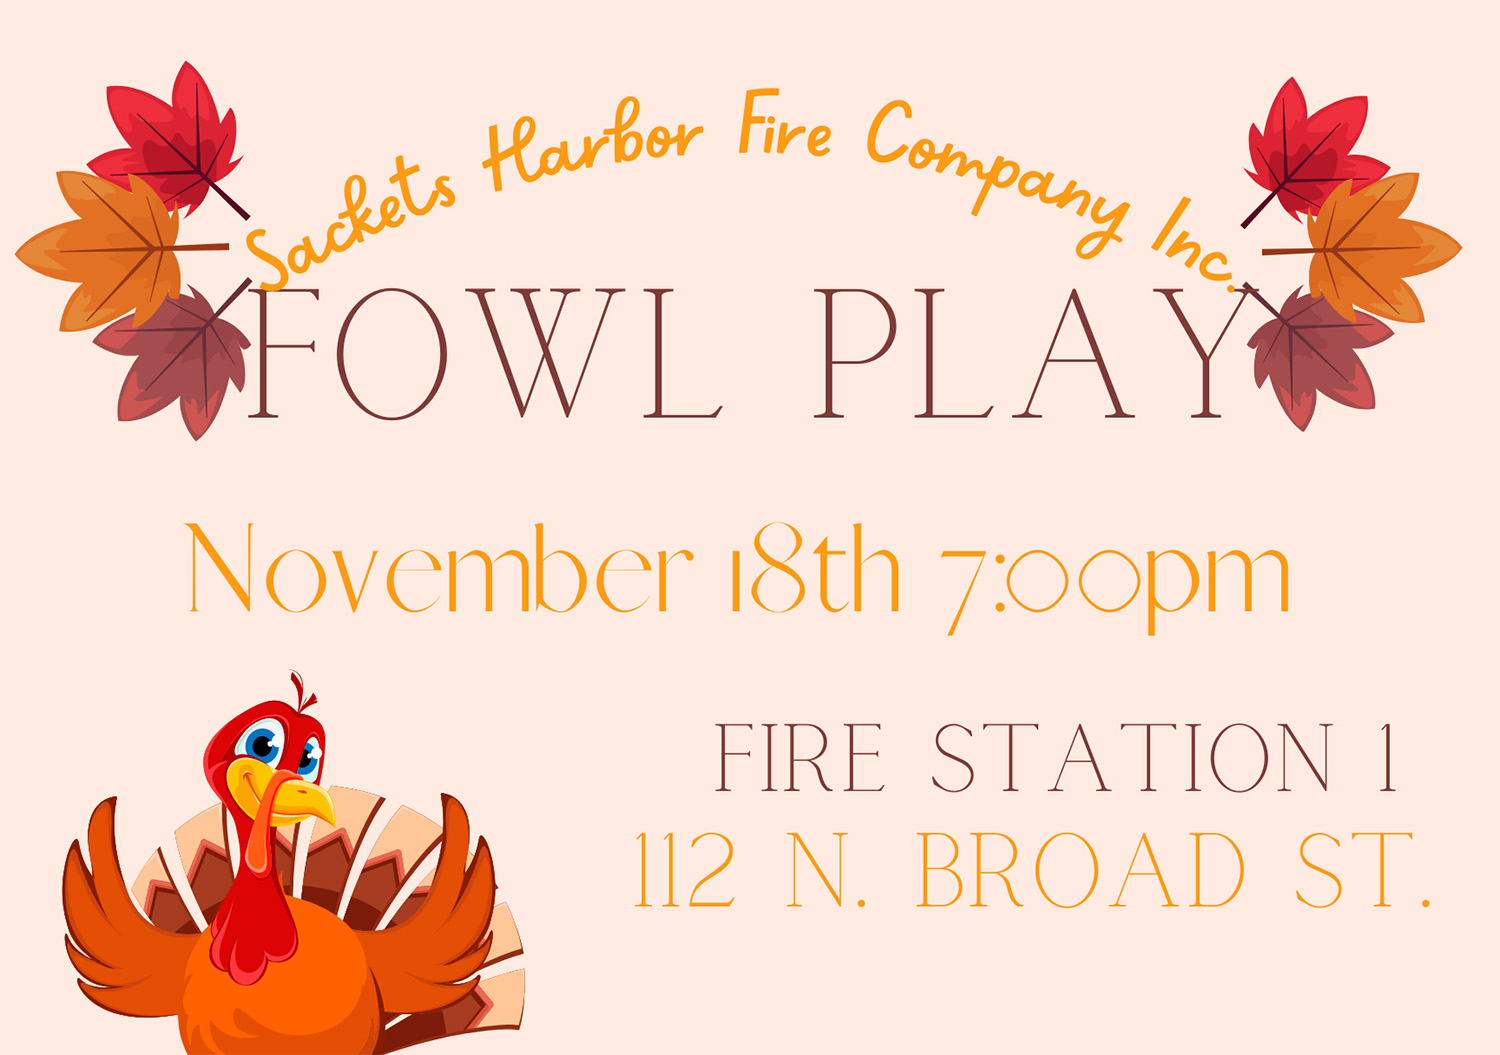 Top portion of the Fire Company's Fowl Play Flyer